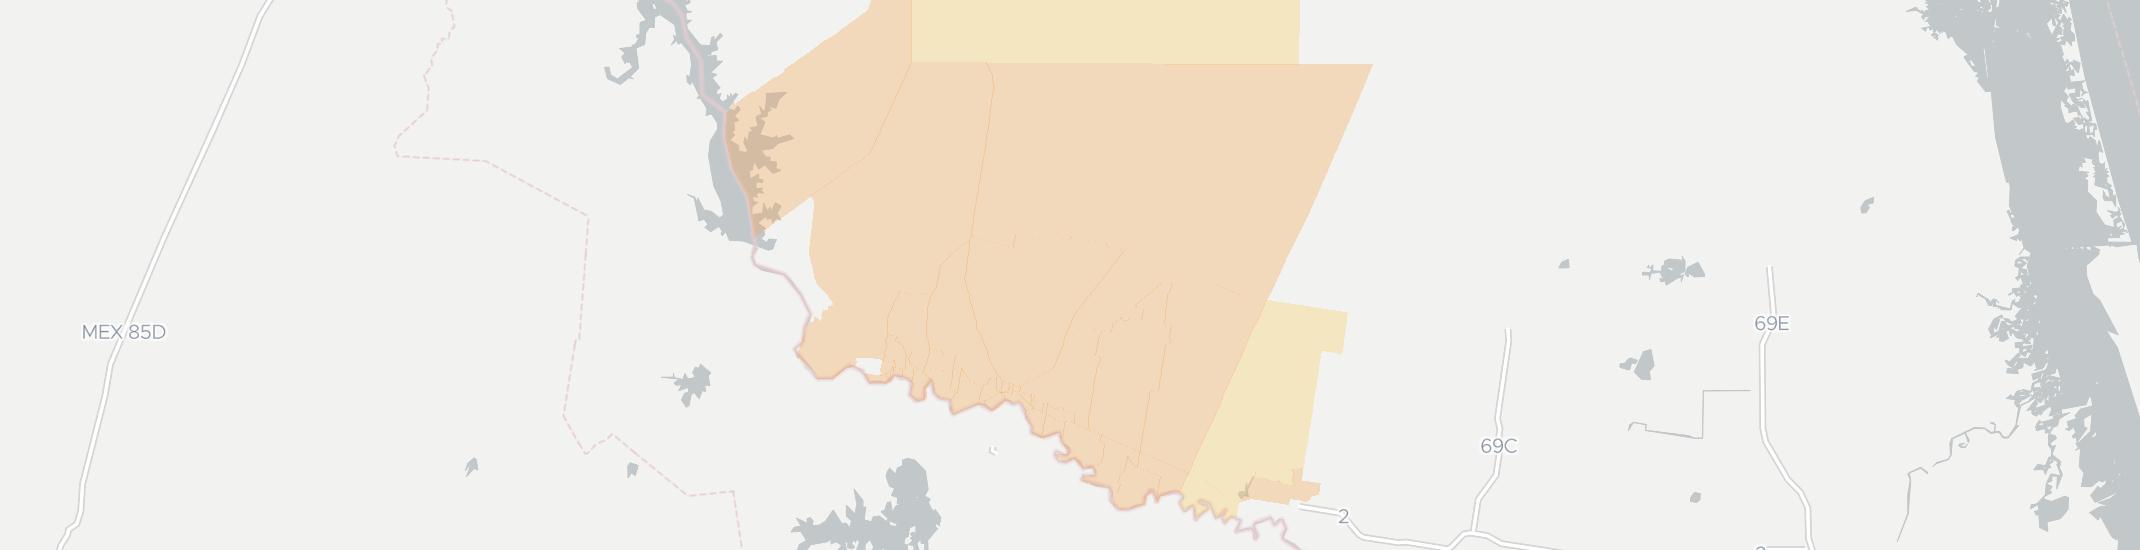 Rio Grande City Internet Competition Map. Click for interactive map.